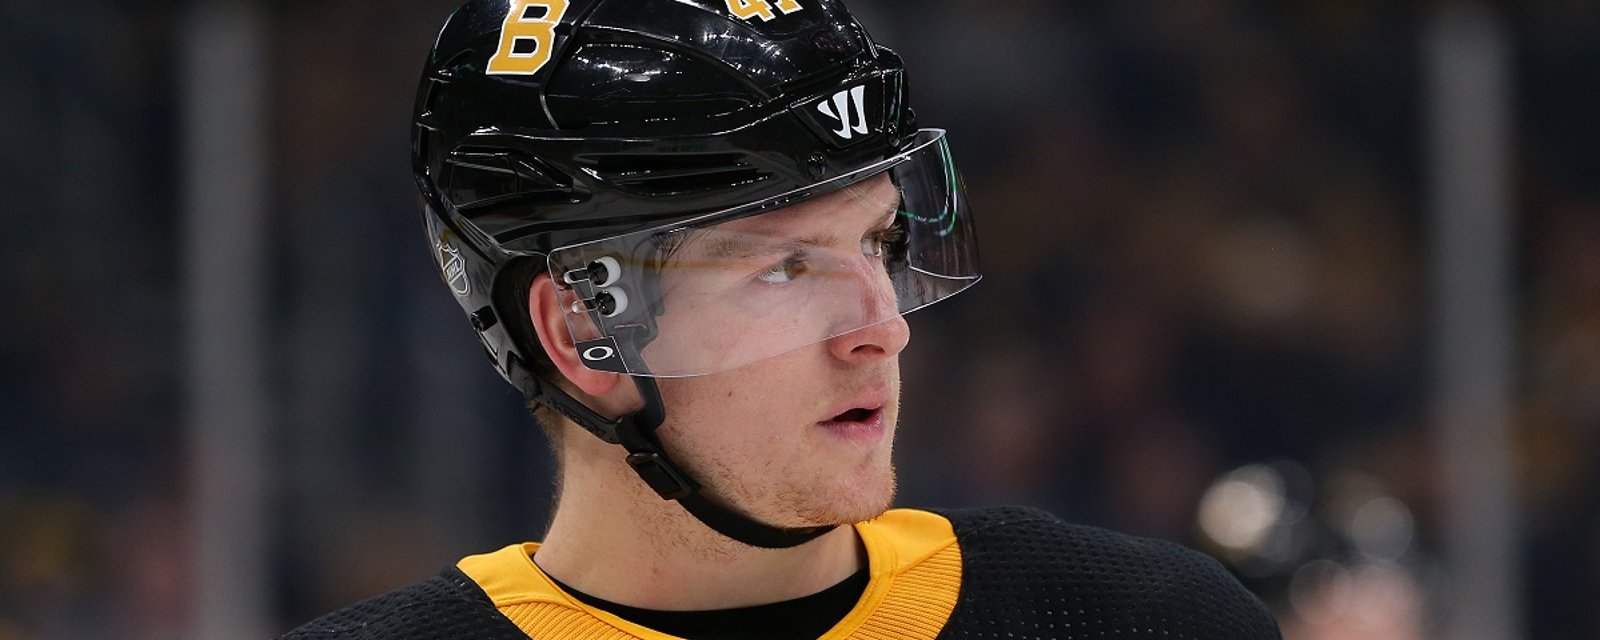 Torey Krug's future in Boston now in serious doubt.